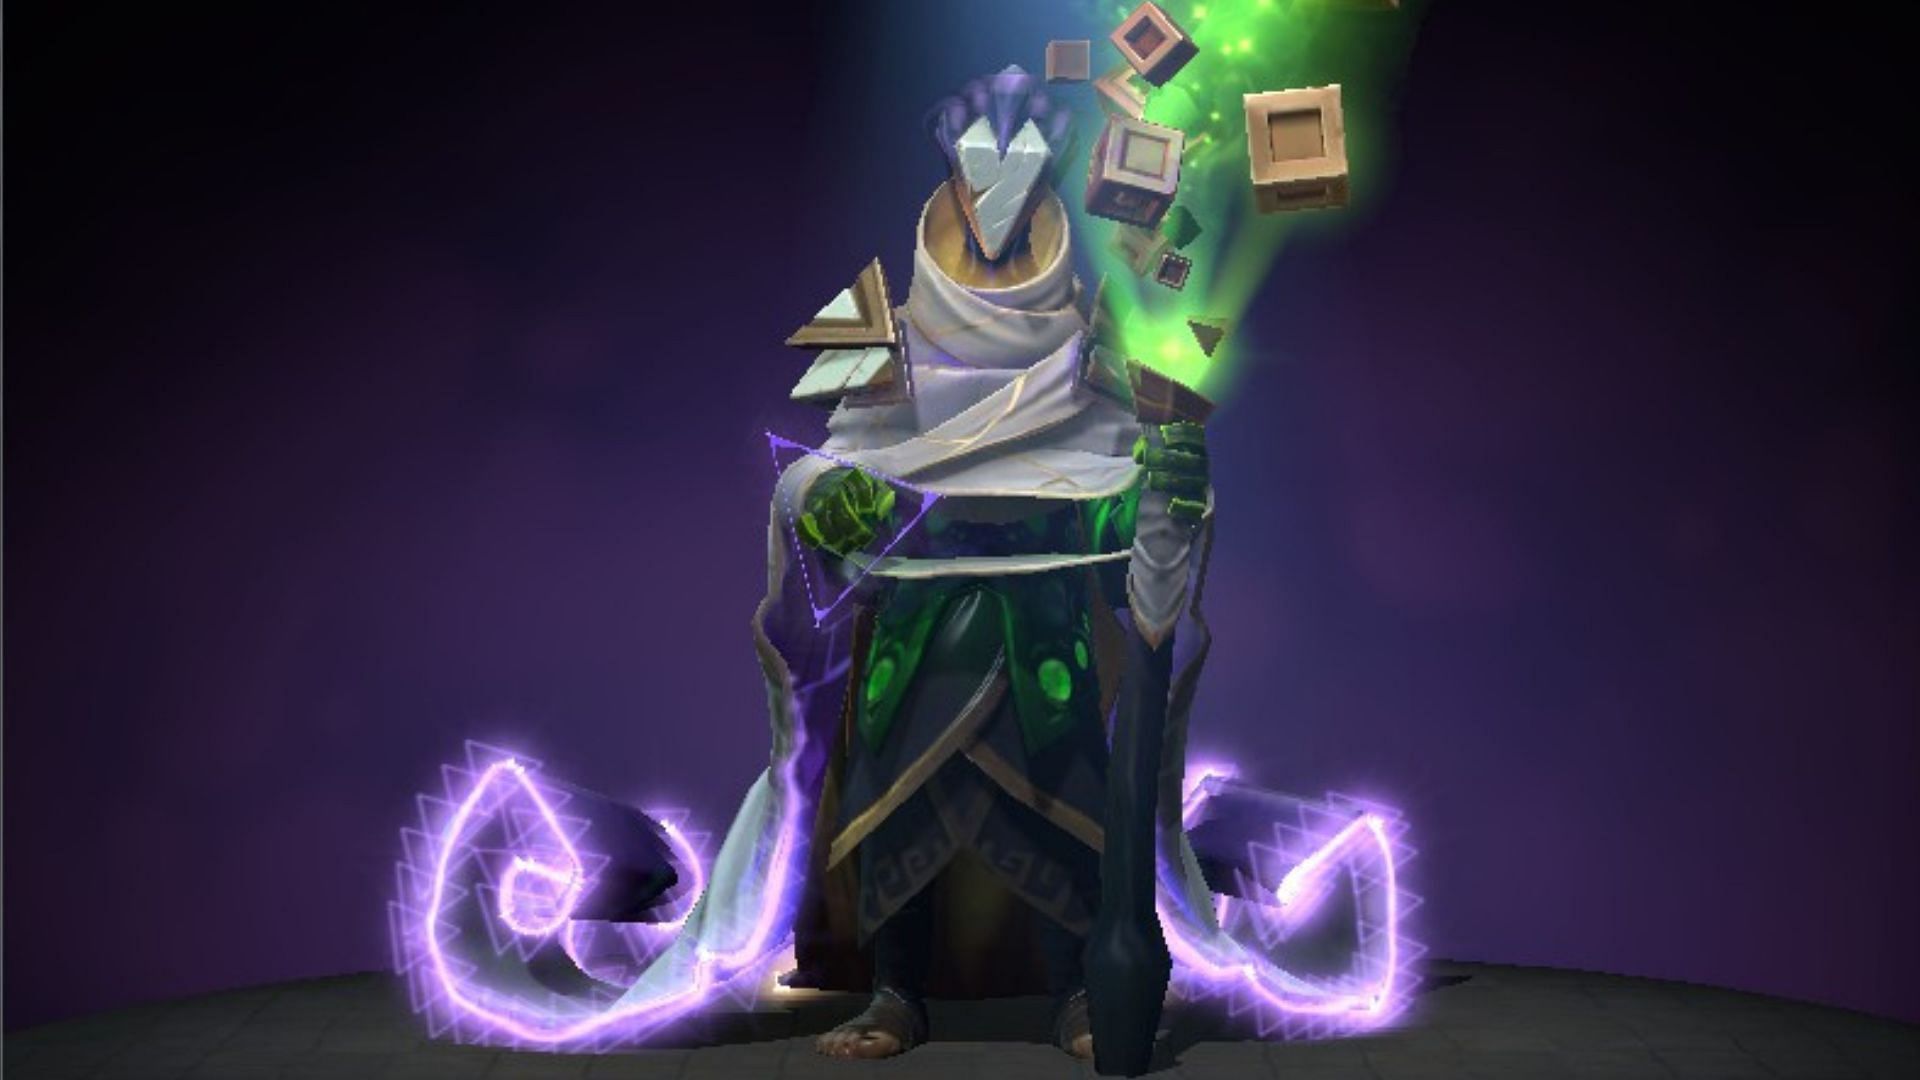 Avatar of the Impossible Realm (Image via Dota 2 and Sportskeeda)